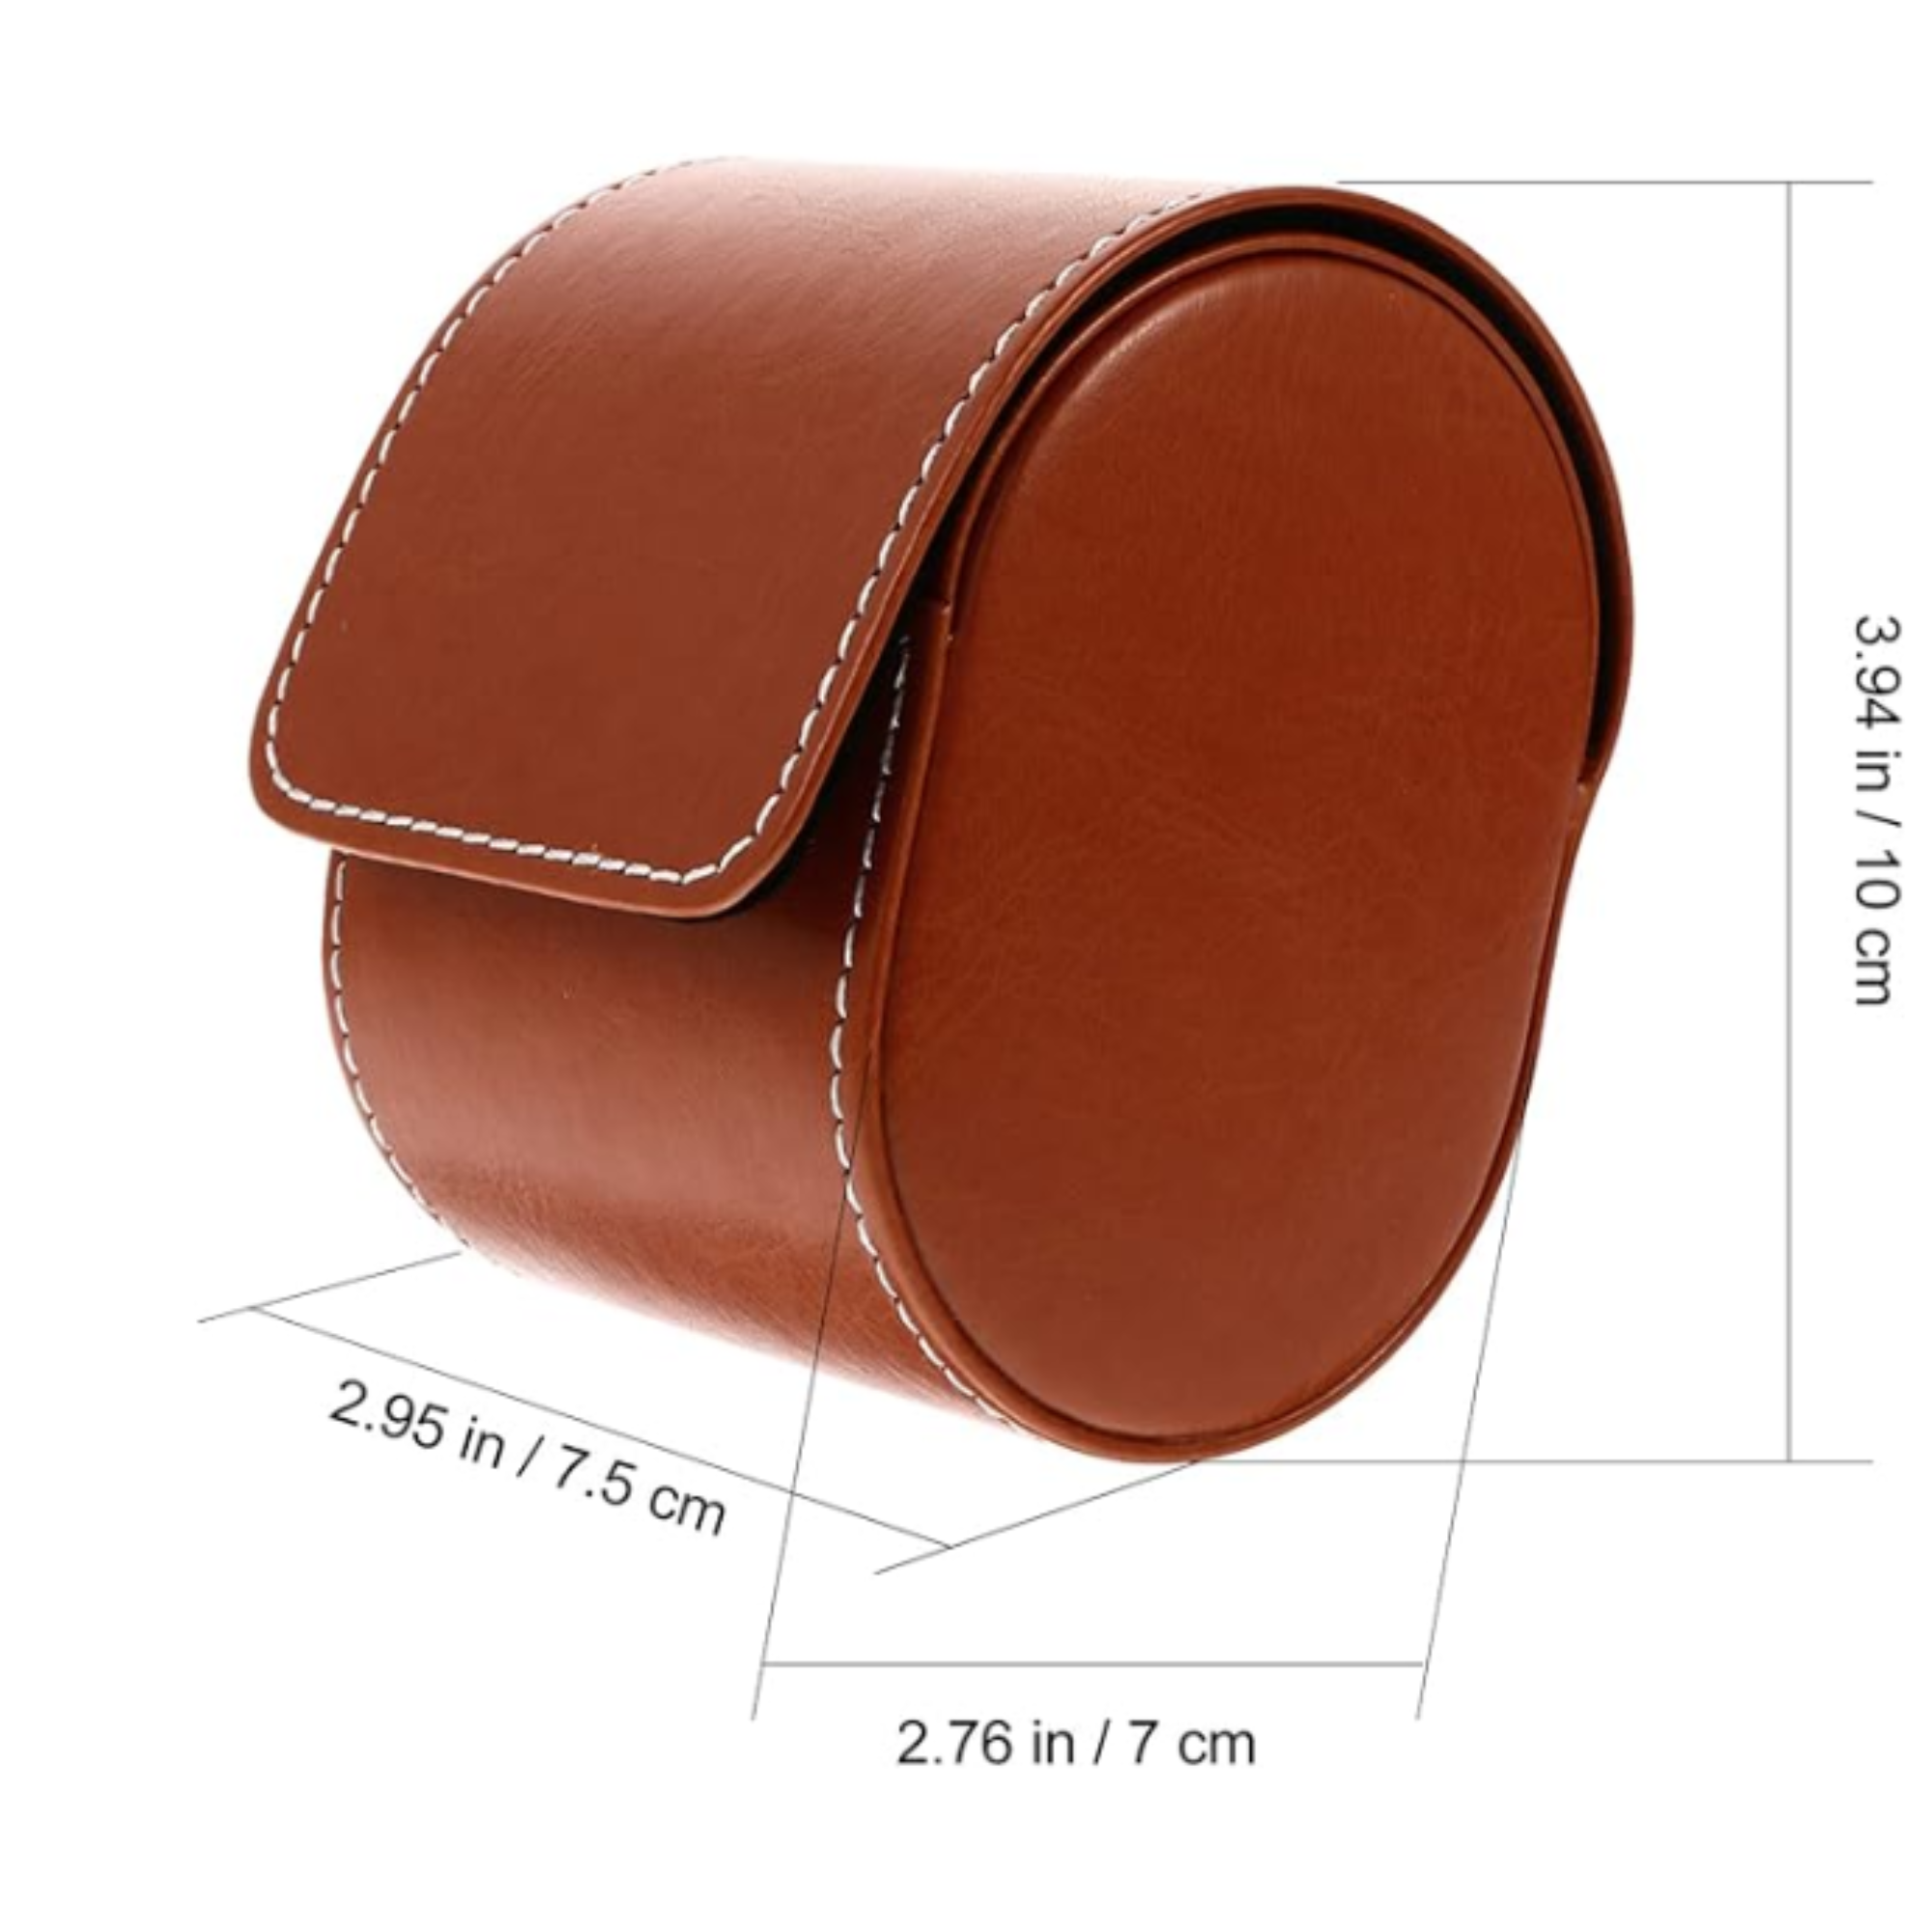 Dream Watches  Minuscle Premium Watch Storage and Travel Case : Single Slot  |  Brown Leather